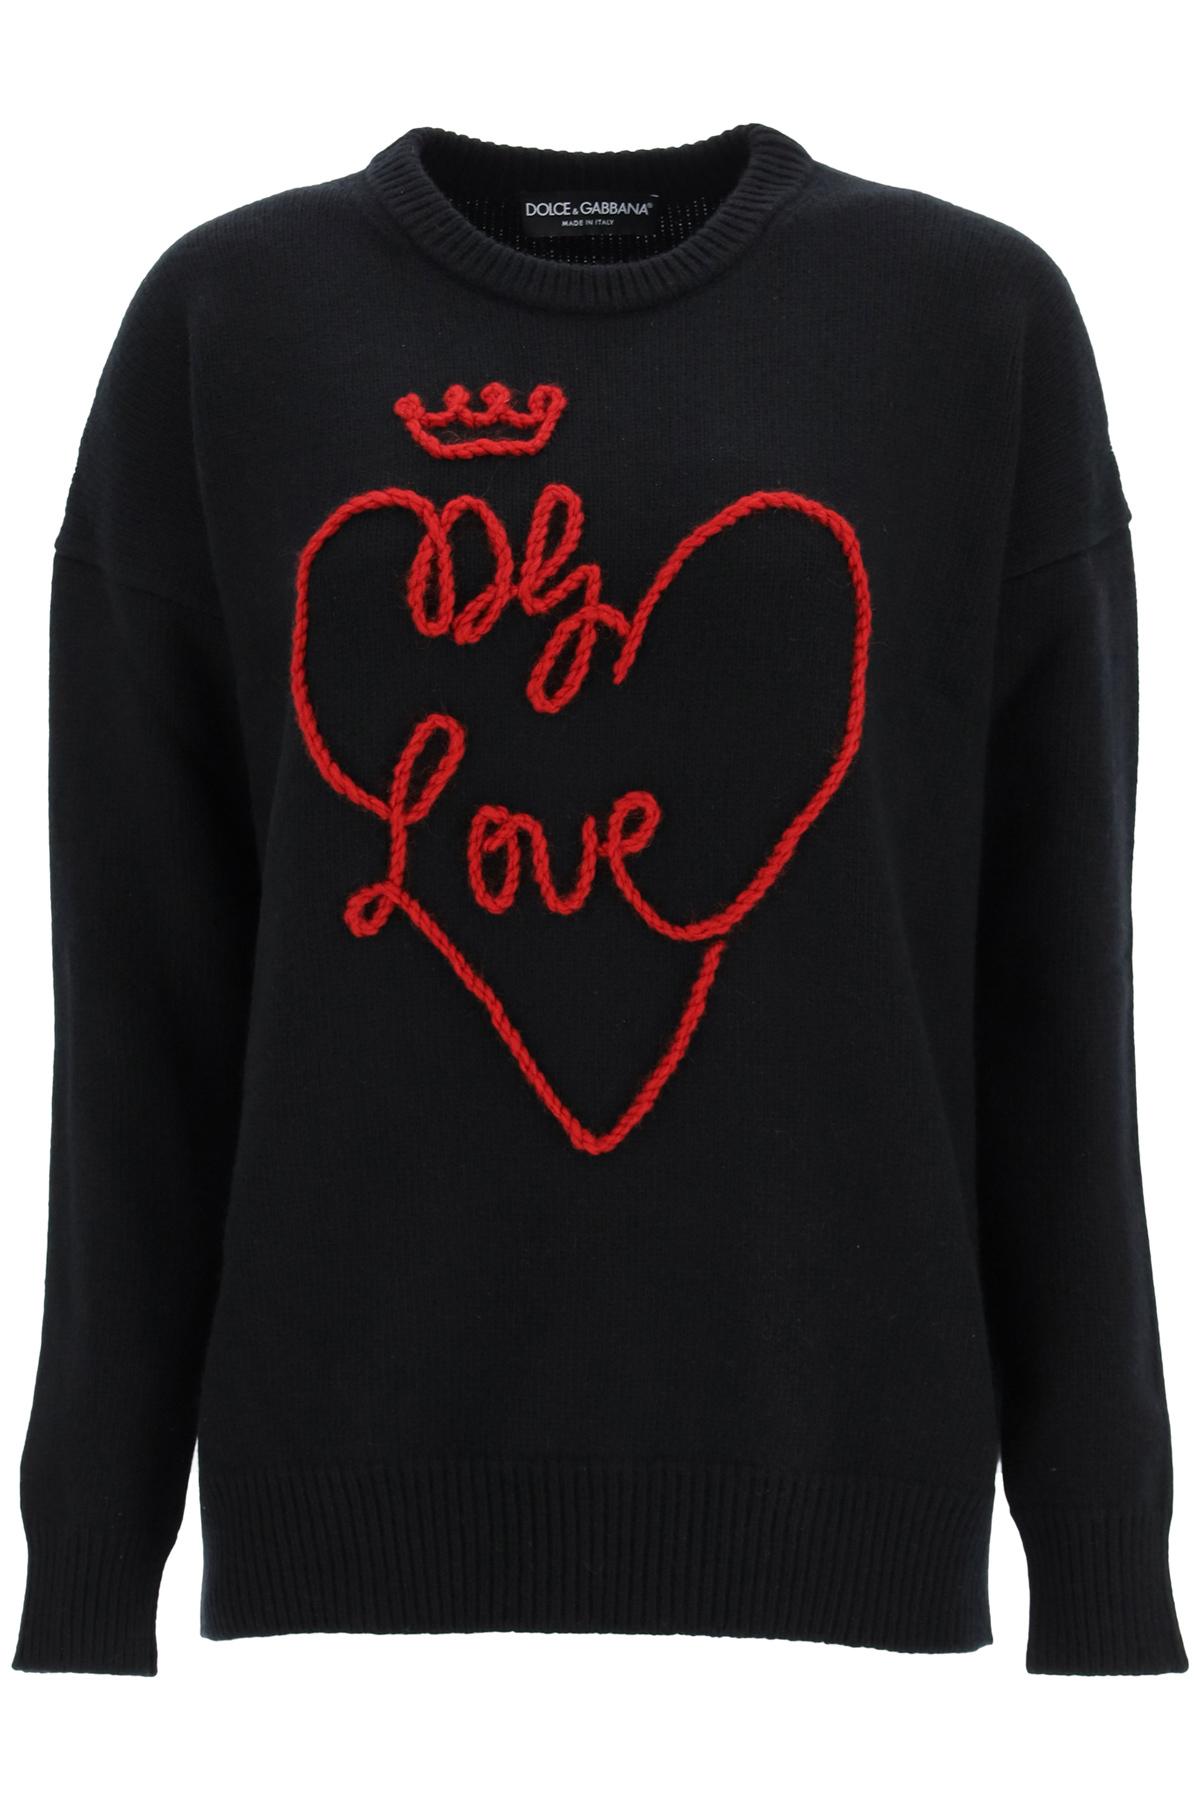 Dolce & Gabbana Wool Hand Embroidered Dg Love Sweater in Black,Red ...